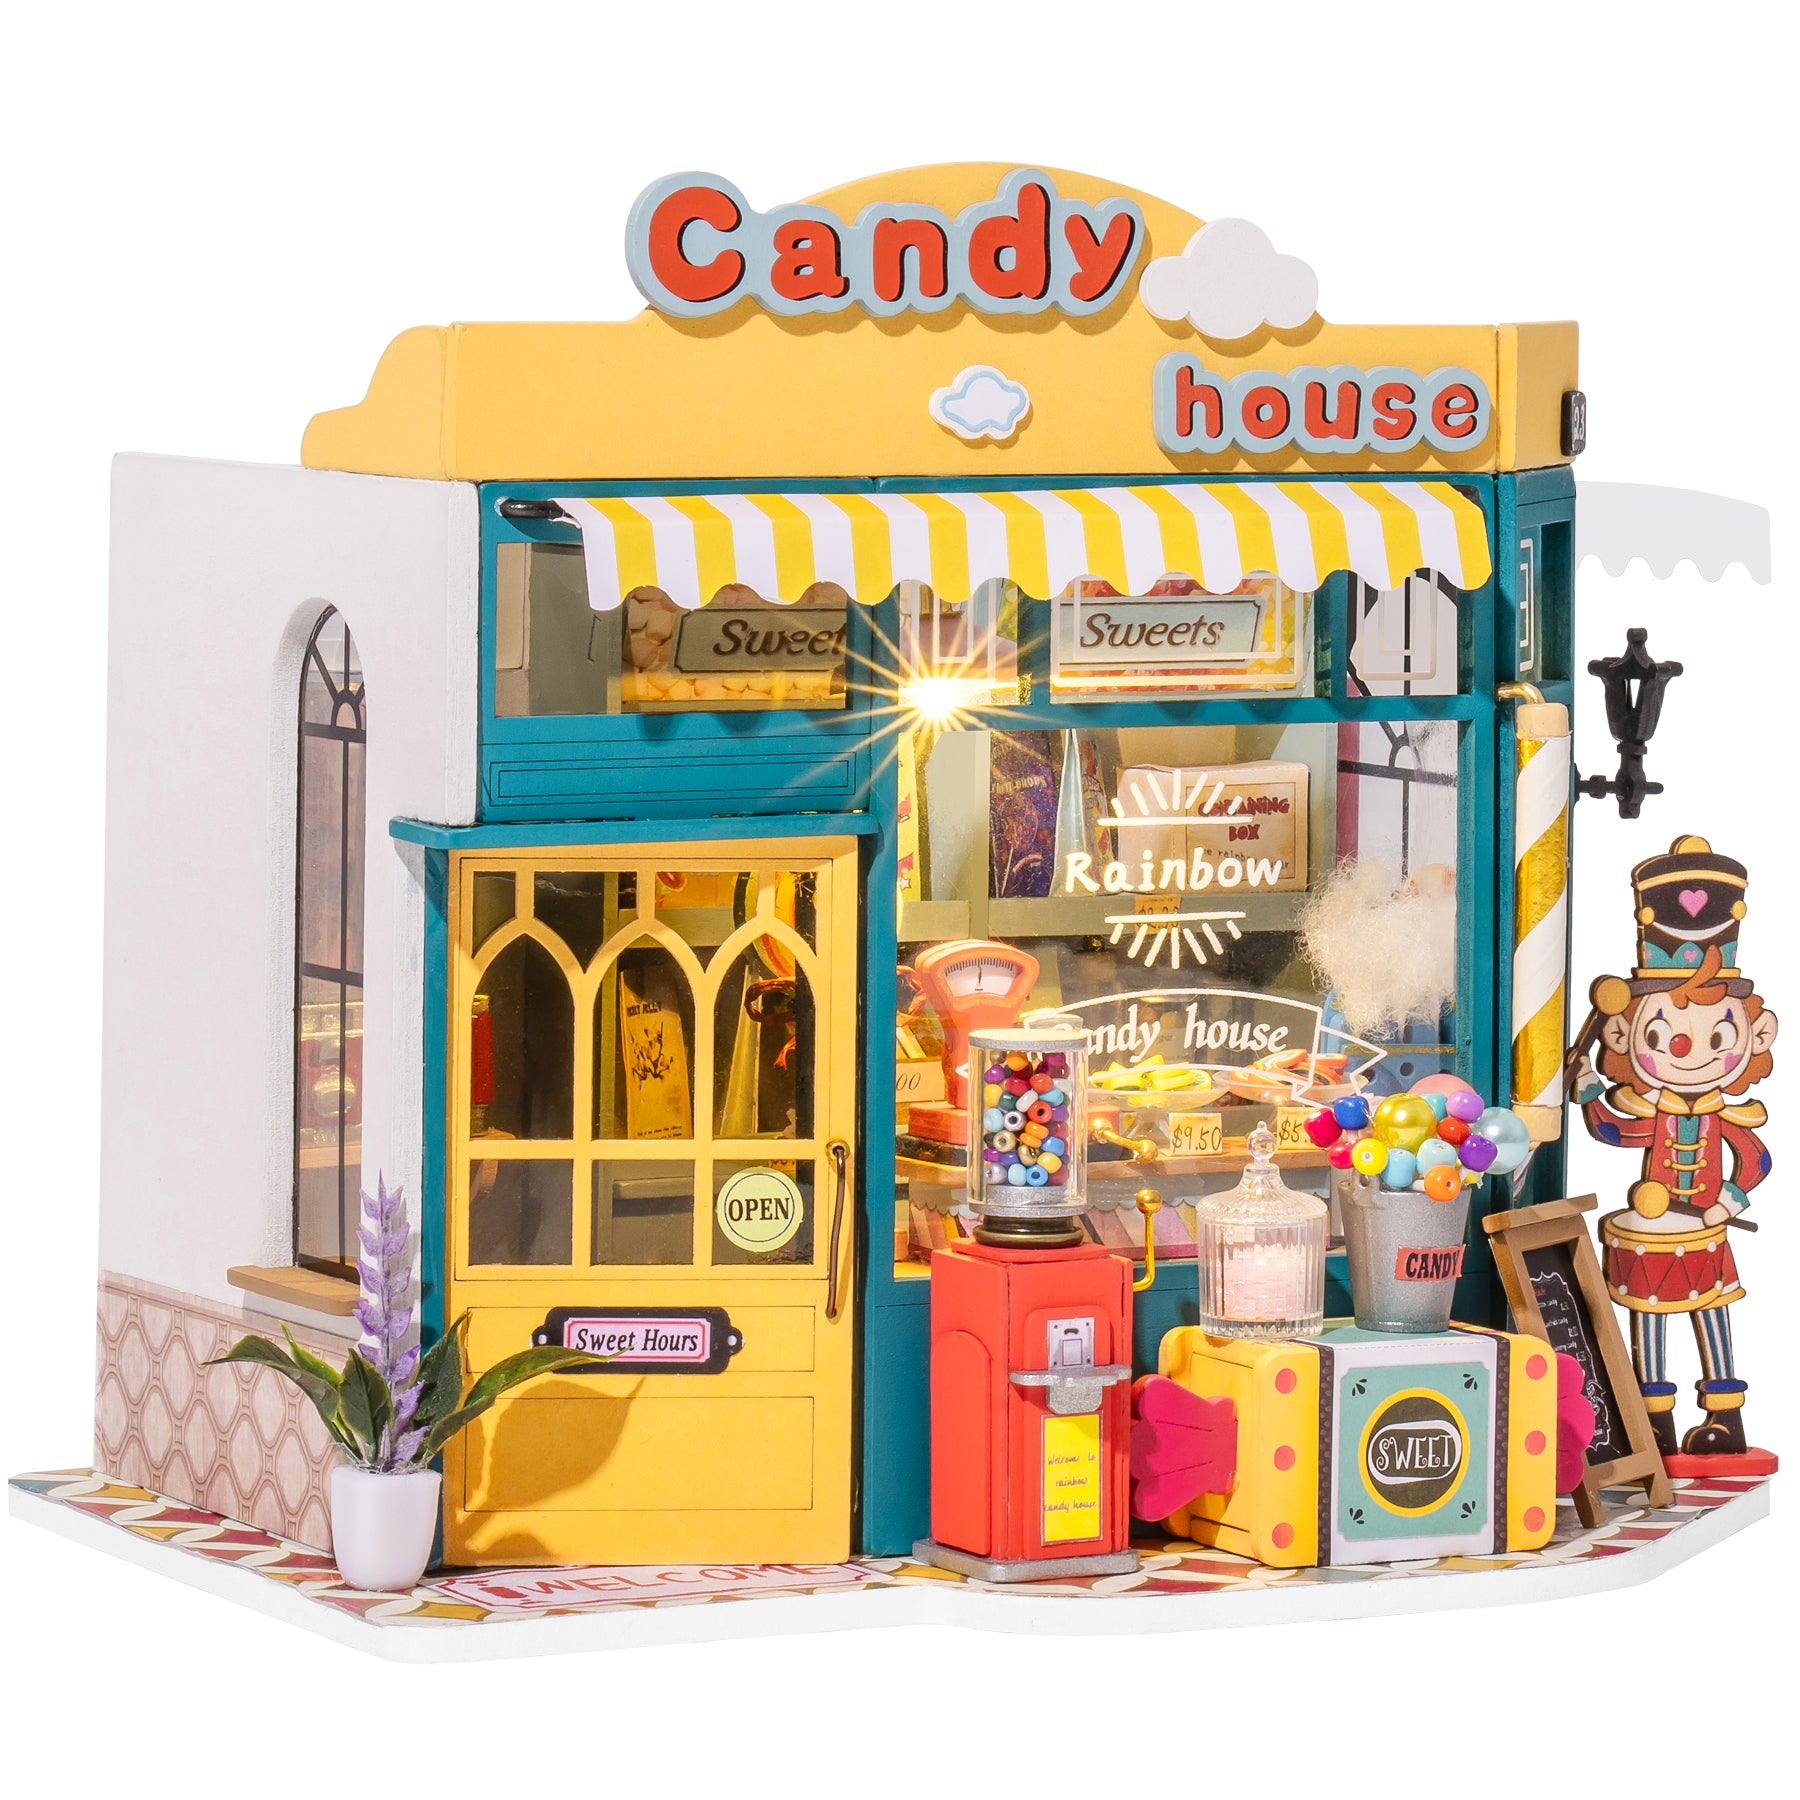 robotime-rolife-rainbow-candy-house-diy-miniature-house-for-kids-girls-xmas-gifts-3d-wooden-puzzle-dollhouse-funny-creative-toys